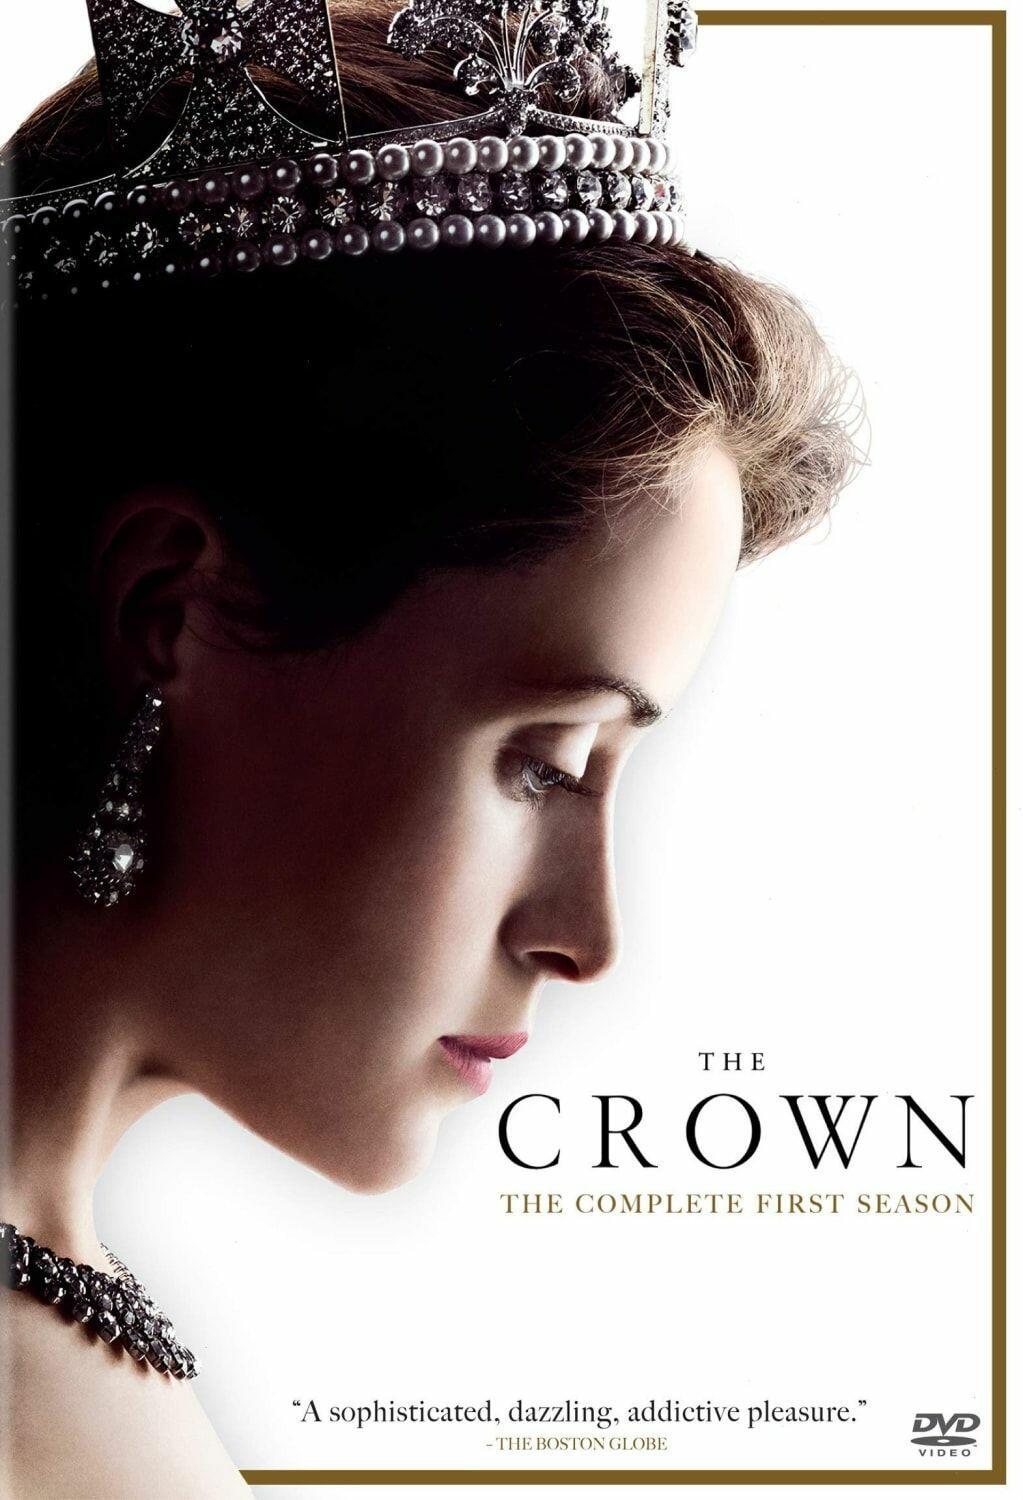 SONY PICTURES HOME ENT CROWN-SEASON 1 (DVD) (4DISCS/DOL DIG 5.1) D50710D on MovieShack